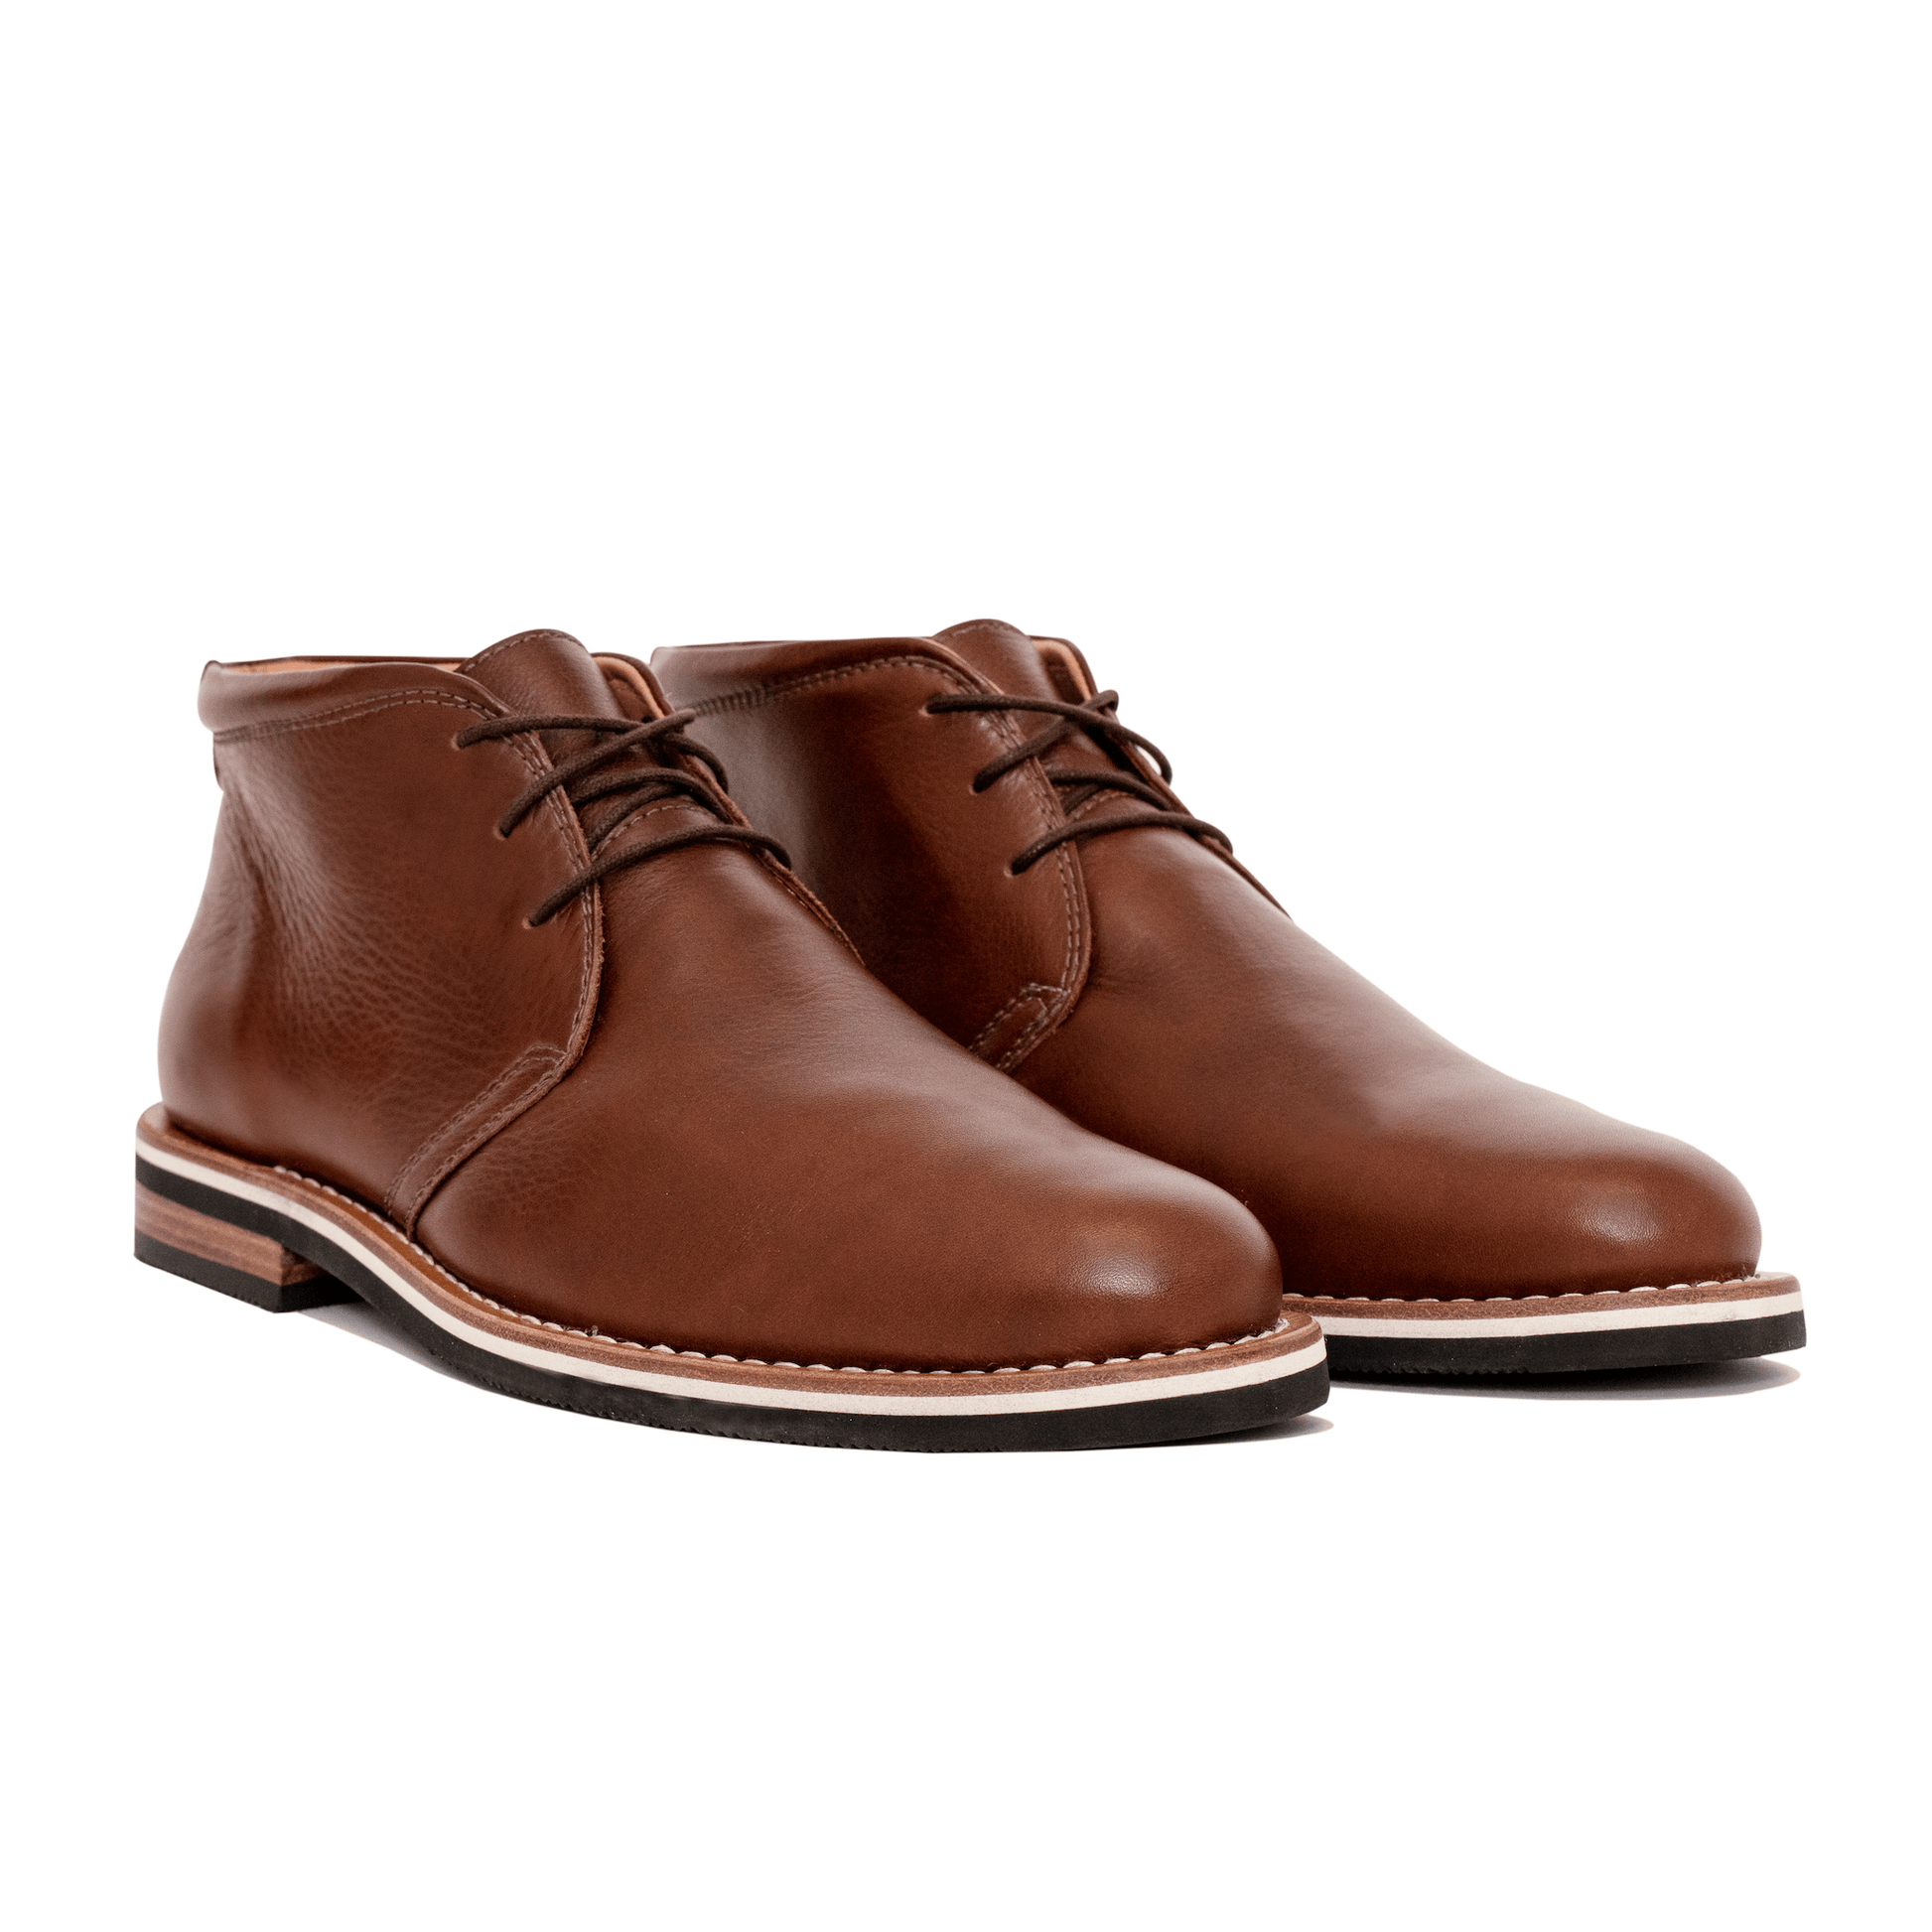 HELM Boots The Hynes Brown